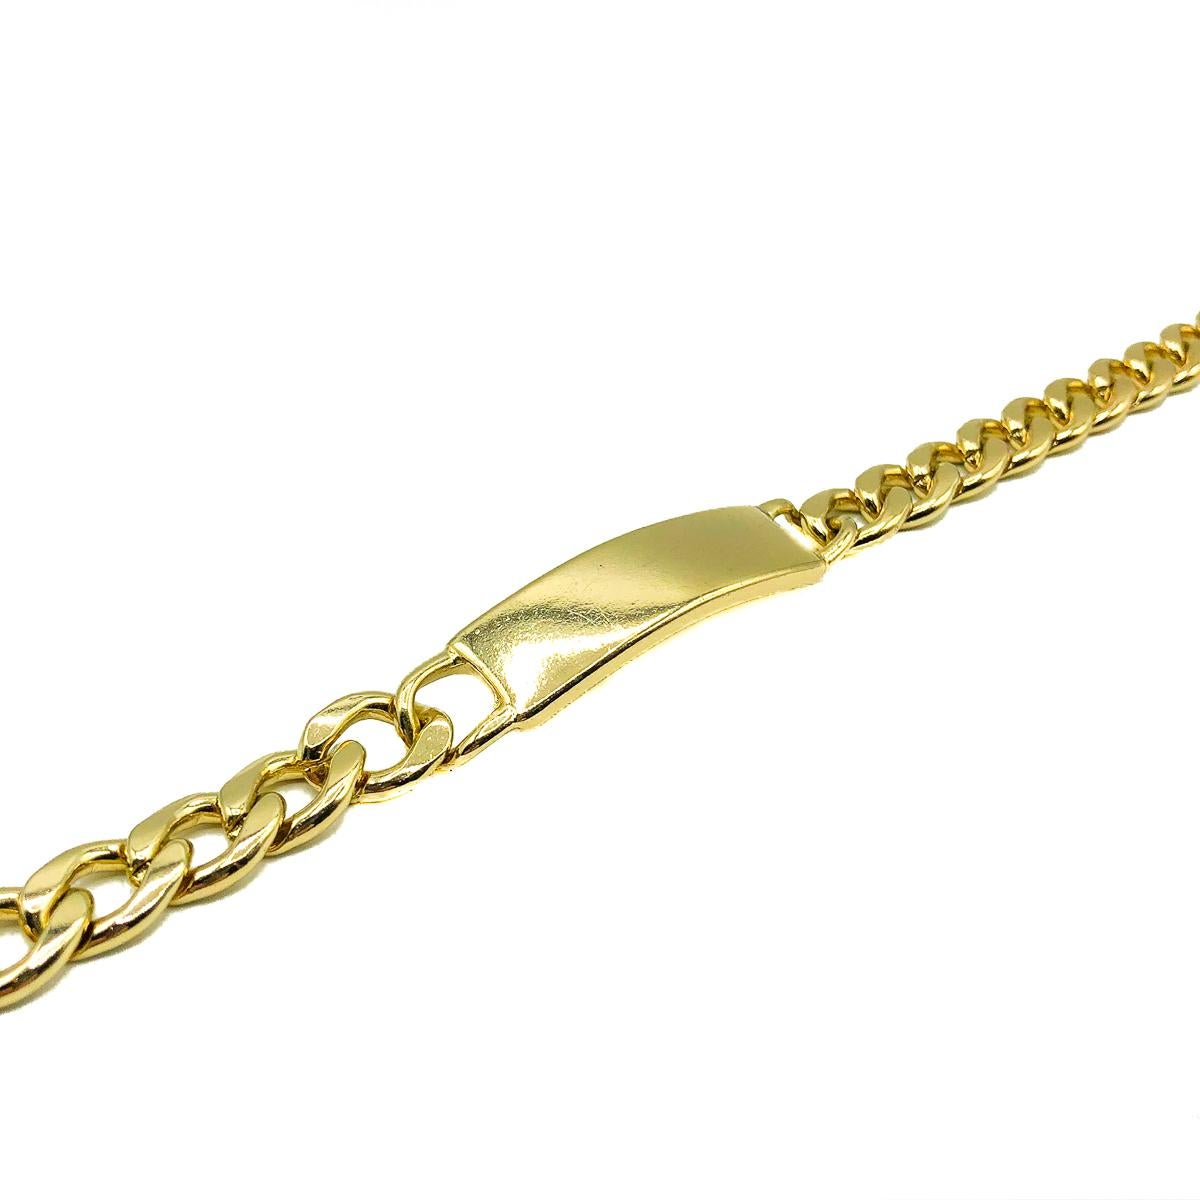 A Vintage ID Bar Necklace. Crafted in weighty lustrous gold plated metal. Featuring an ID style bar suspended between chunky chain. In very good vintage condition without damage or repair, approx. adjustable 43-50cms. An uber cool style statement